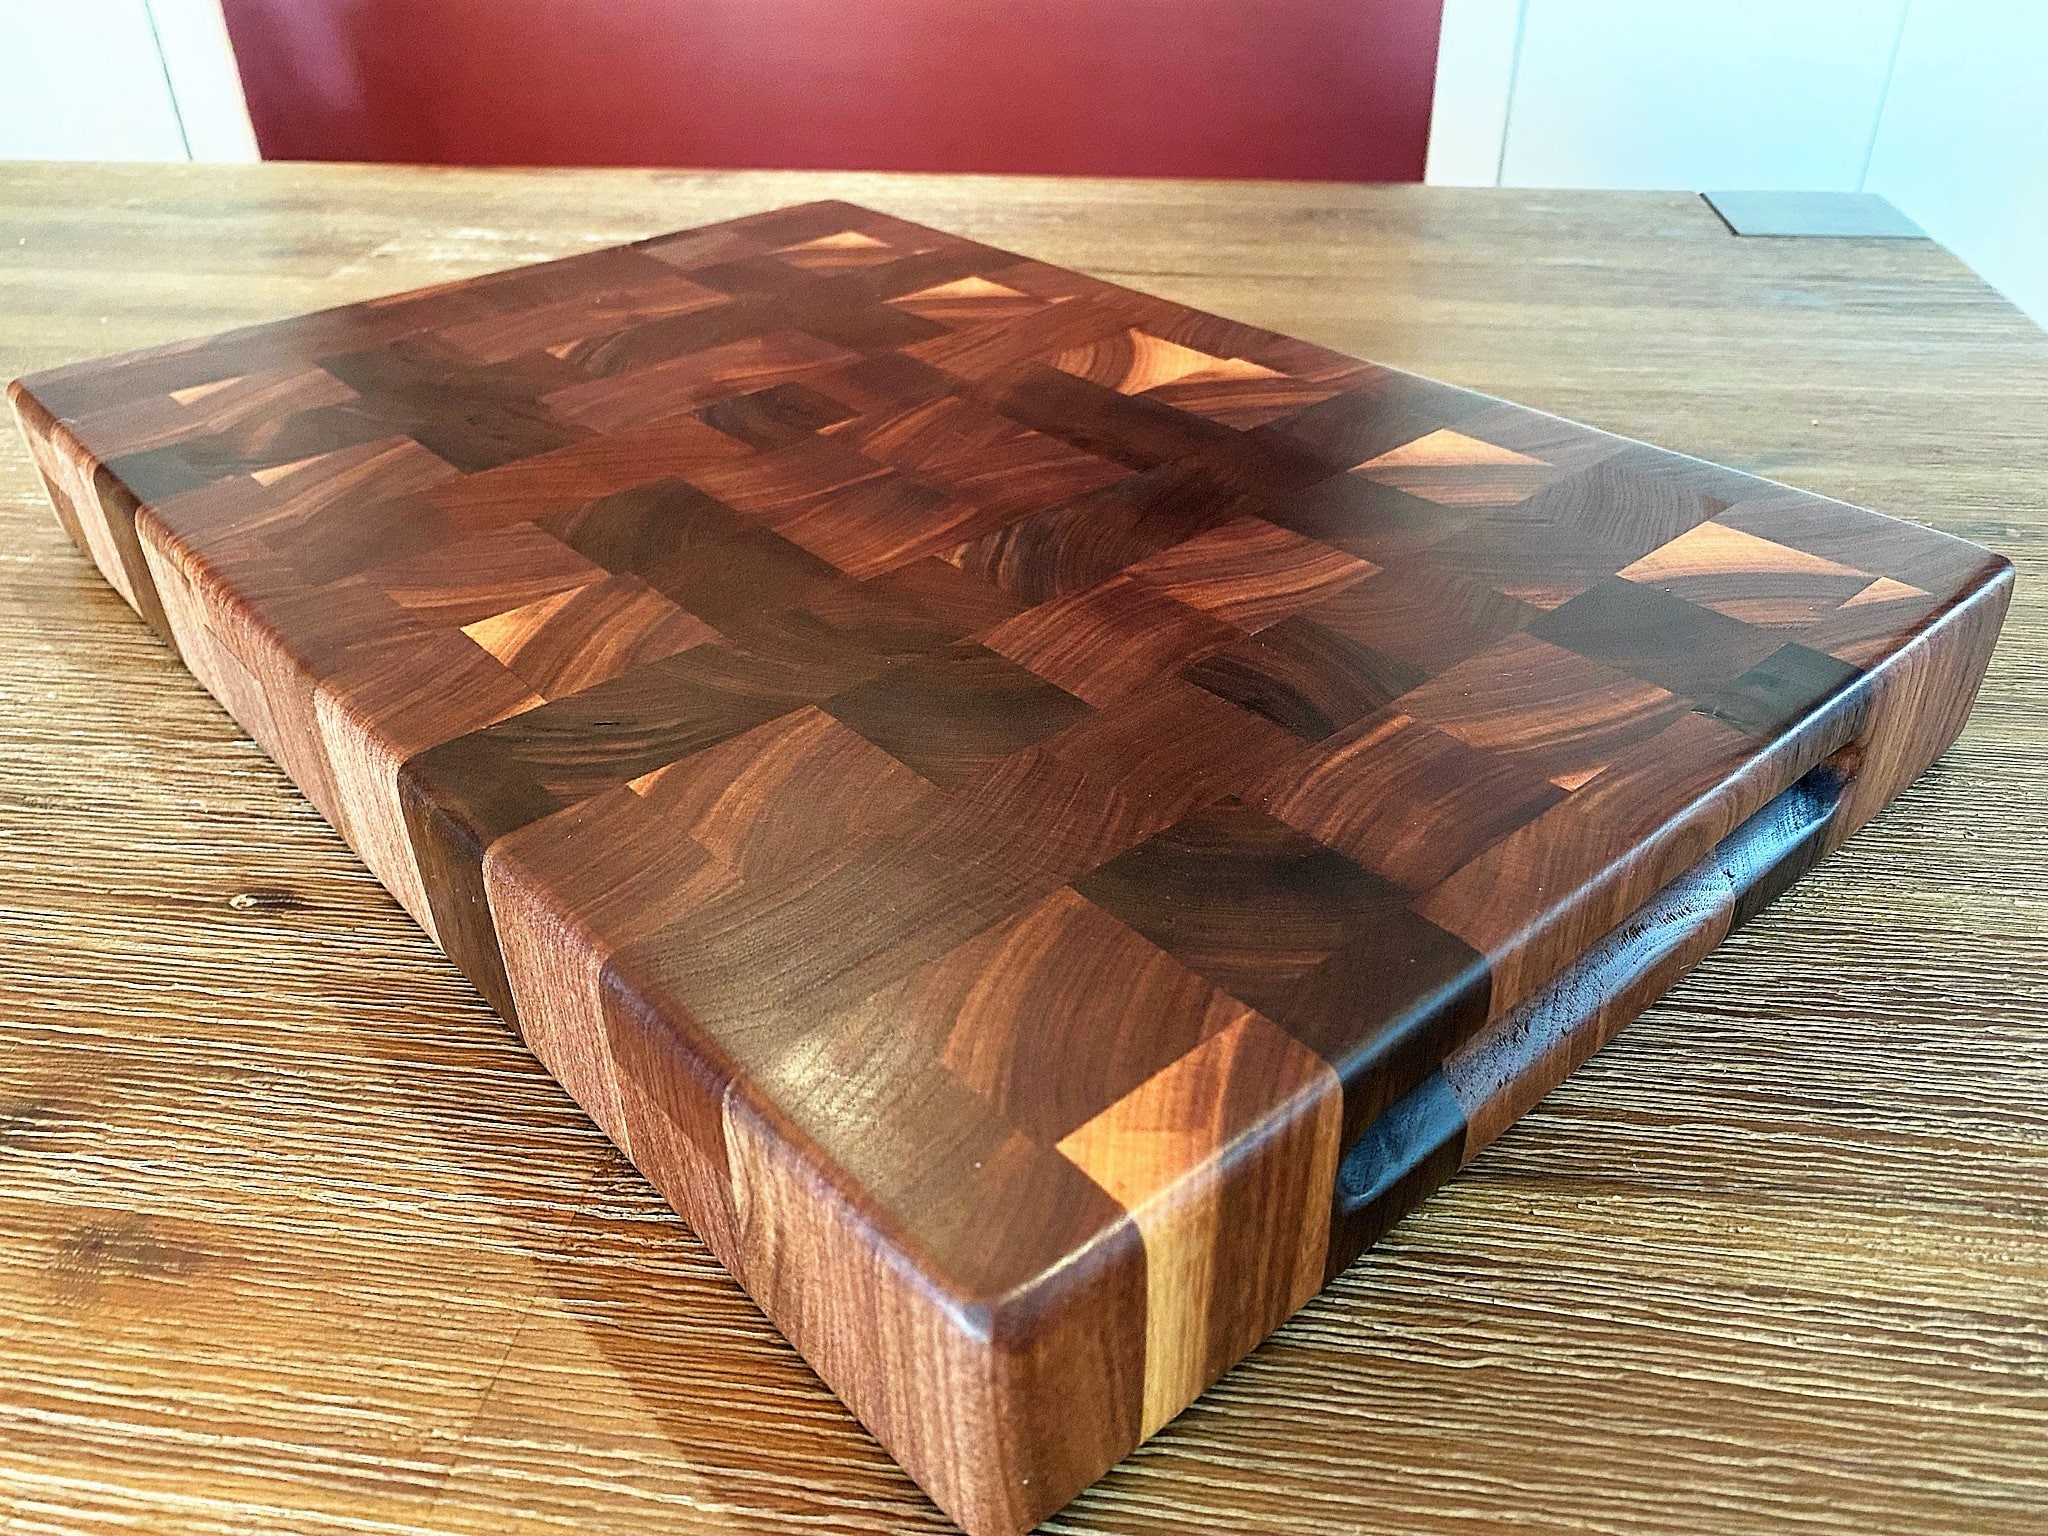 Large End Grain Walnut Chopping Board With Central Finger Grooves Full 50mm  Thick 